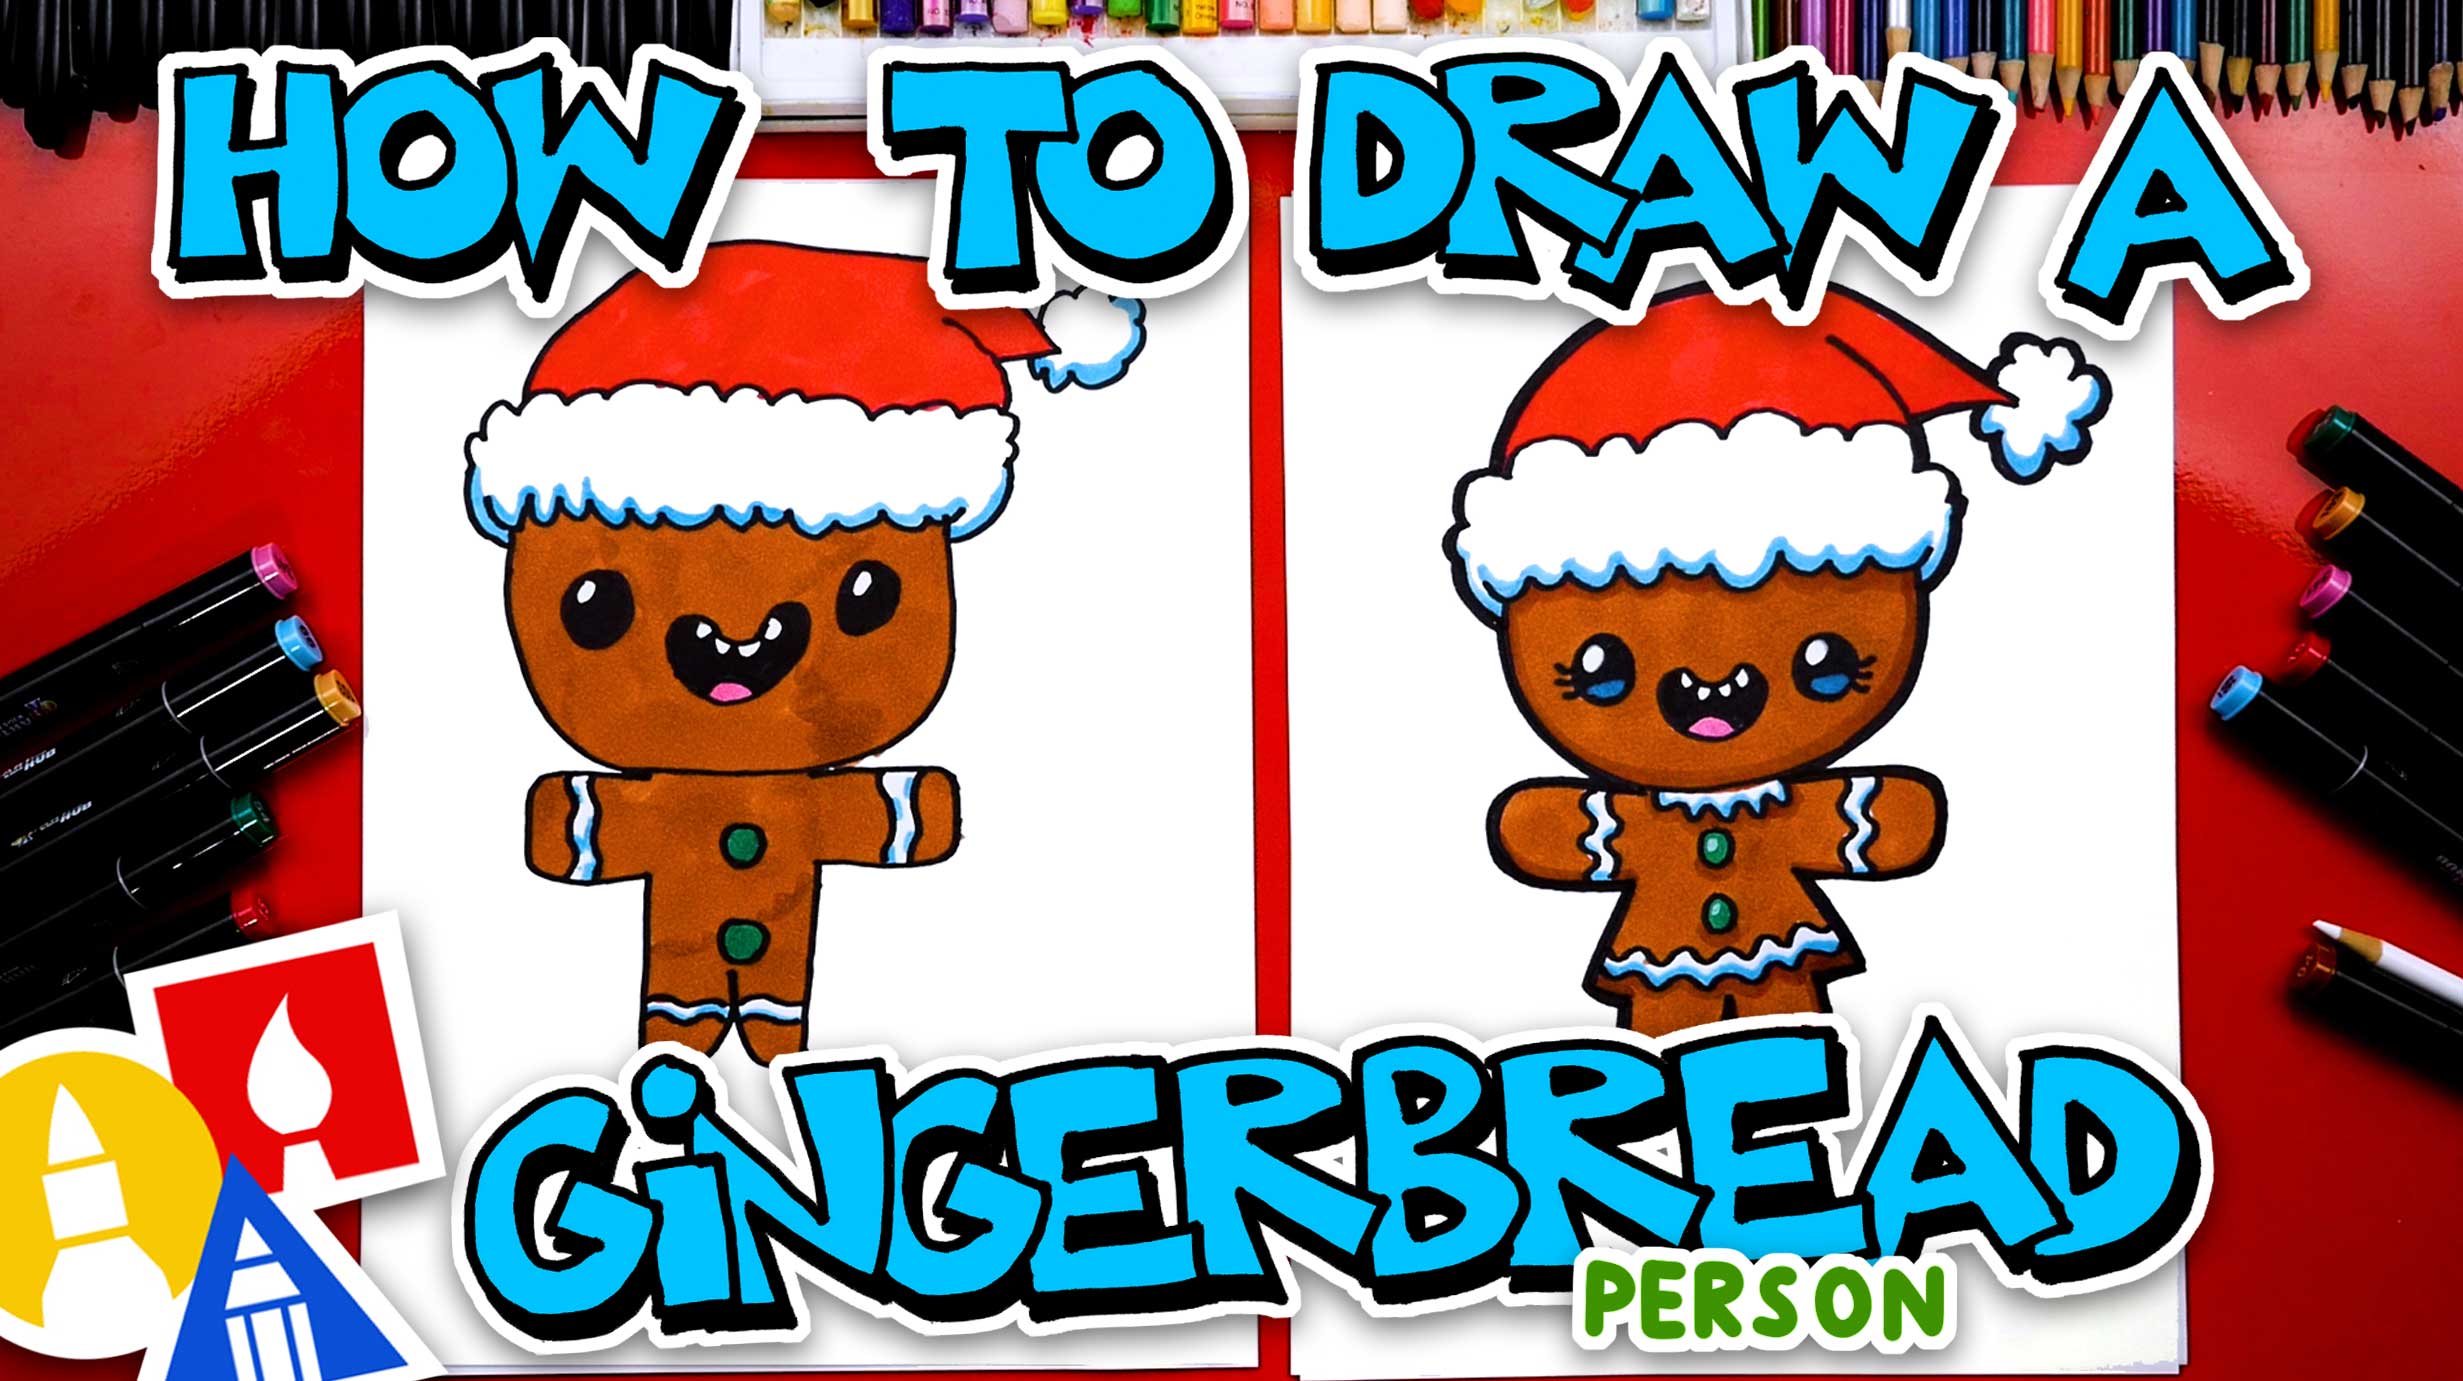 https://artforkidshub.com/wp-content/uploads/2022/12/How-To-Draw-A-Gingerbread-Person-With-Santa-Hat-thumbnail.jpg